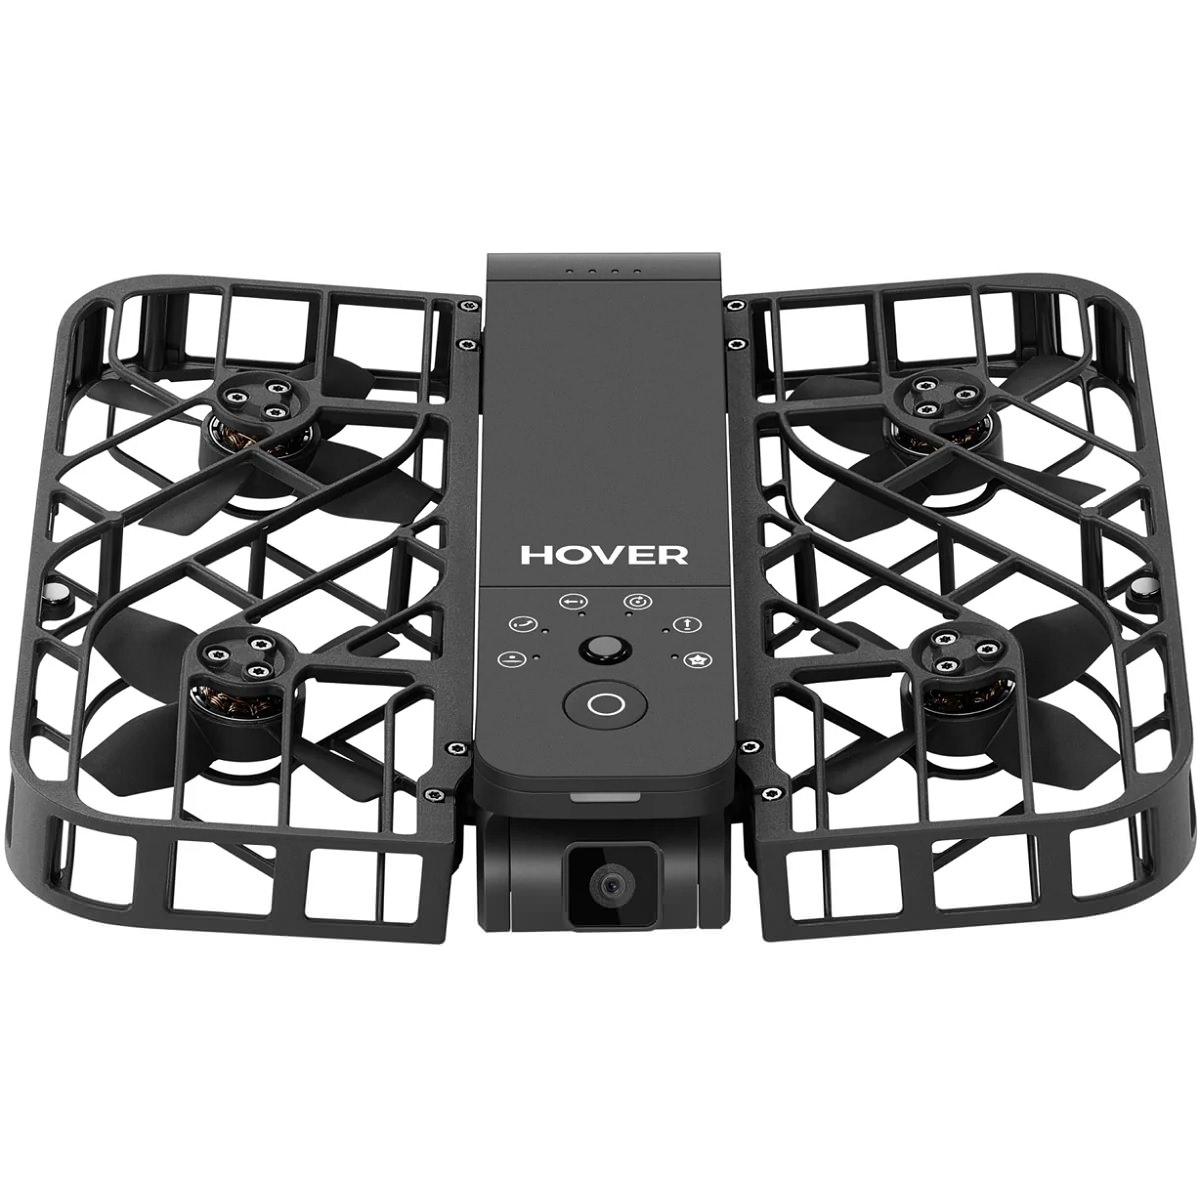 X1 Self-Flying Camera, Pocket-Sized Drone HDR Video Capture, Palm Takeoff,  Intelligent Flight Paths, Follow-Me Mode, Foldable Action Camera with